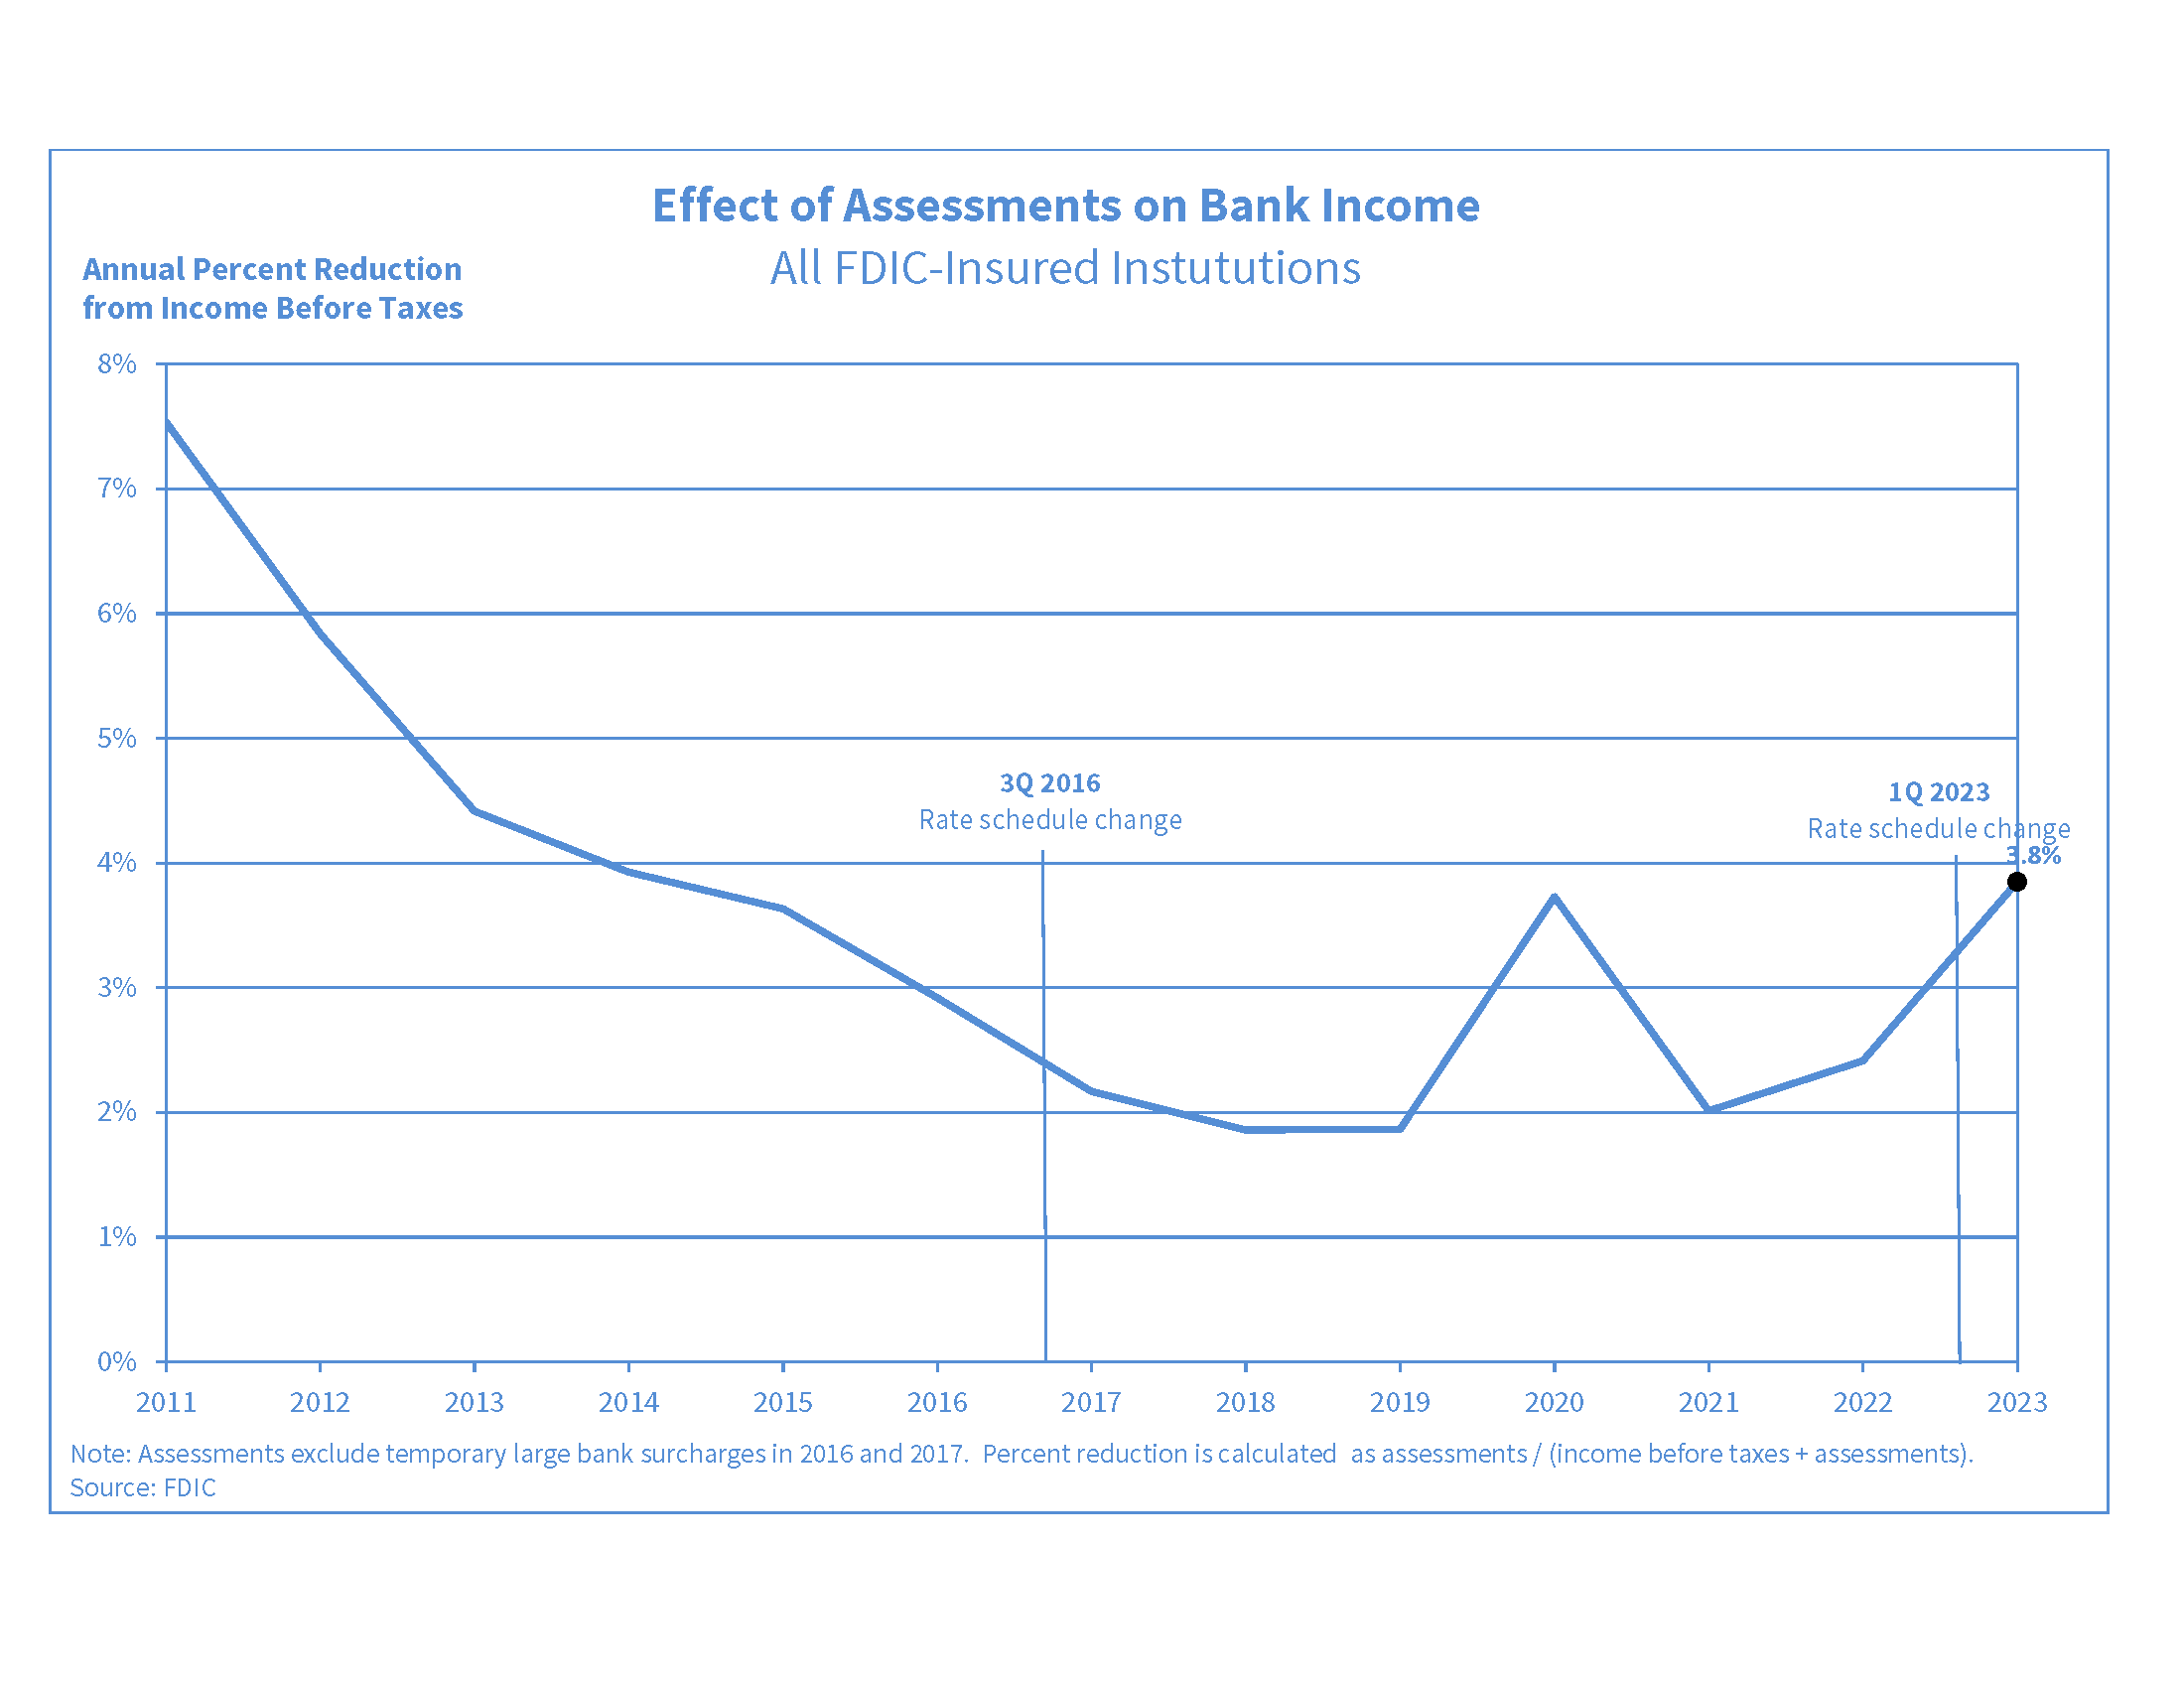 Effect of Assessments on Bank Income for All FDIC-Insured Institutions chart, showing a downward trend for the Annual Percent Reduction from Income Before Taxes rate since 2011 to 2017. The APR from Income Before Taxes rate in 2017 is showing to be at 2.1 percent.